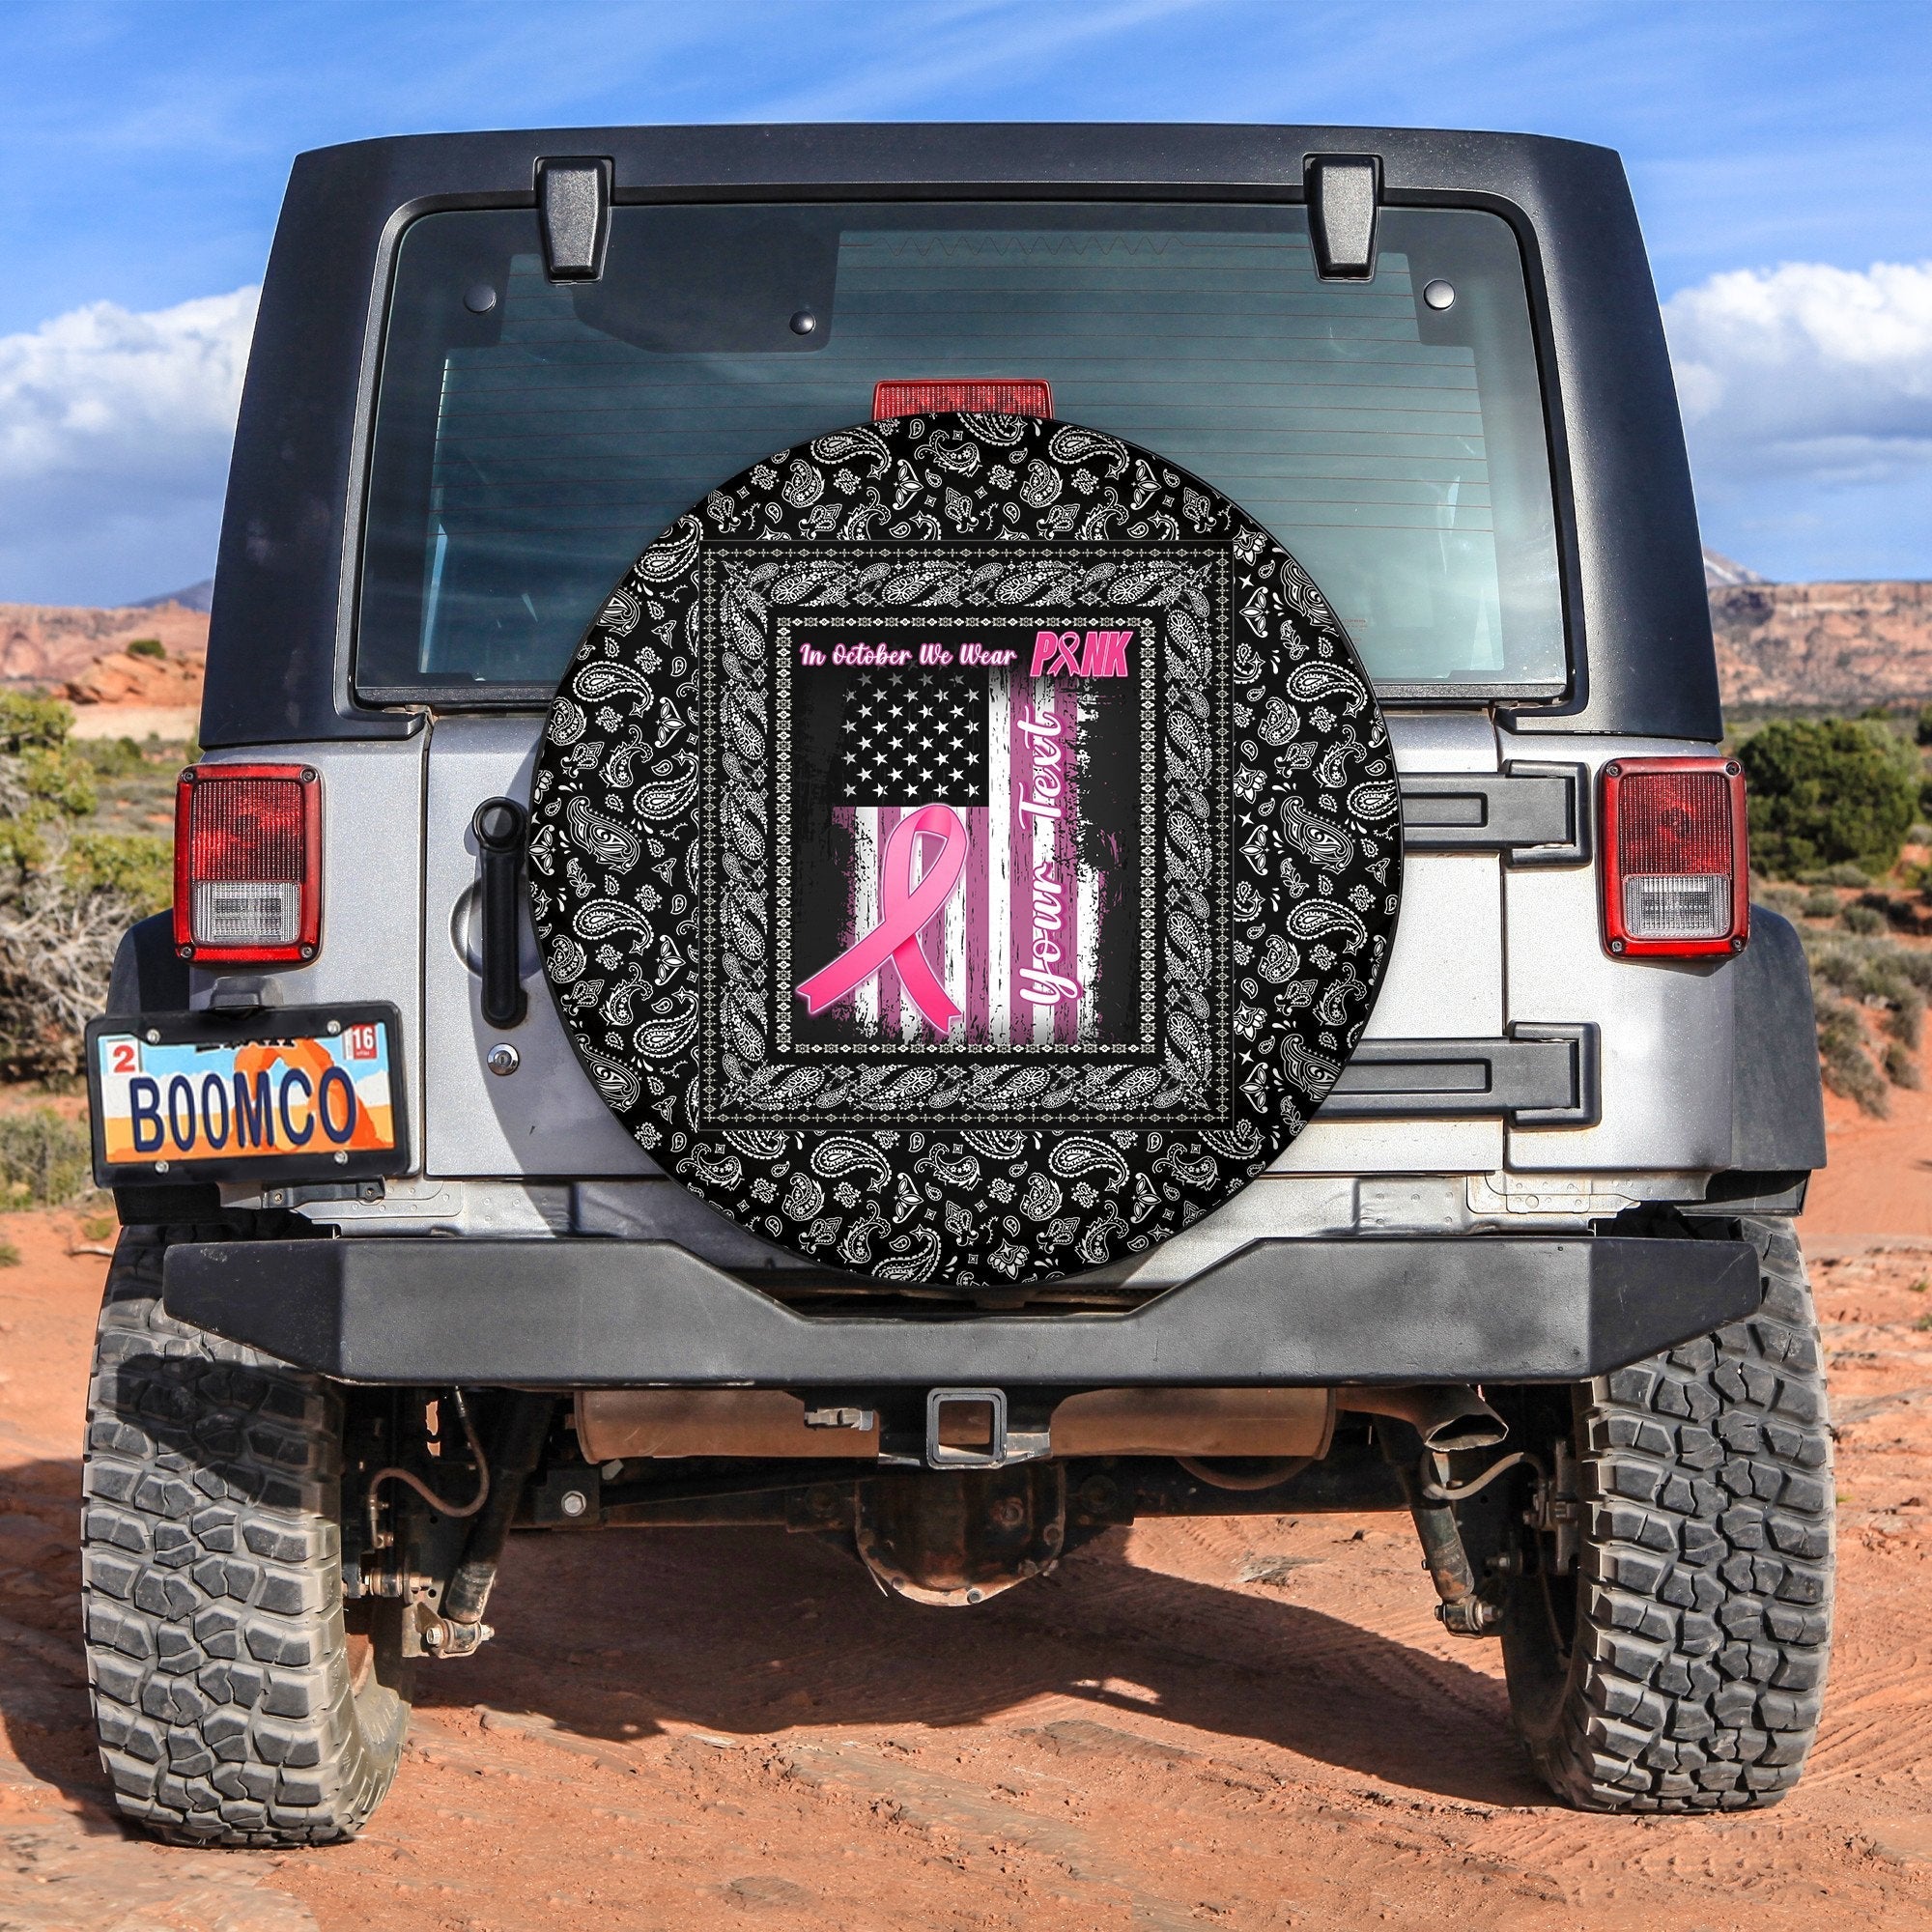 custom-personalised-breast-cancer-spare-tire-cover-black-paisley-pattern-in-october-we-wear-pink